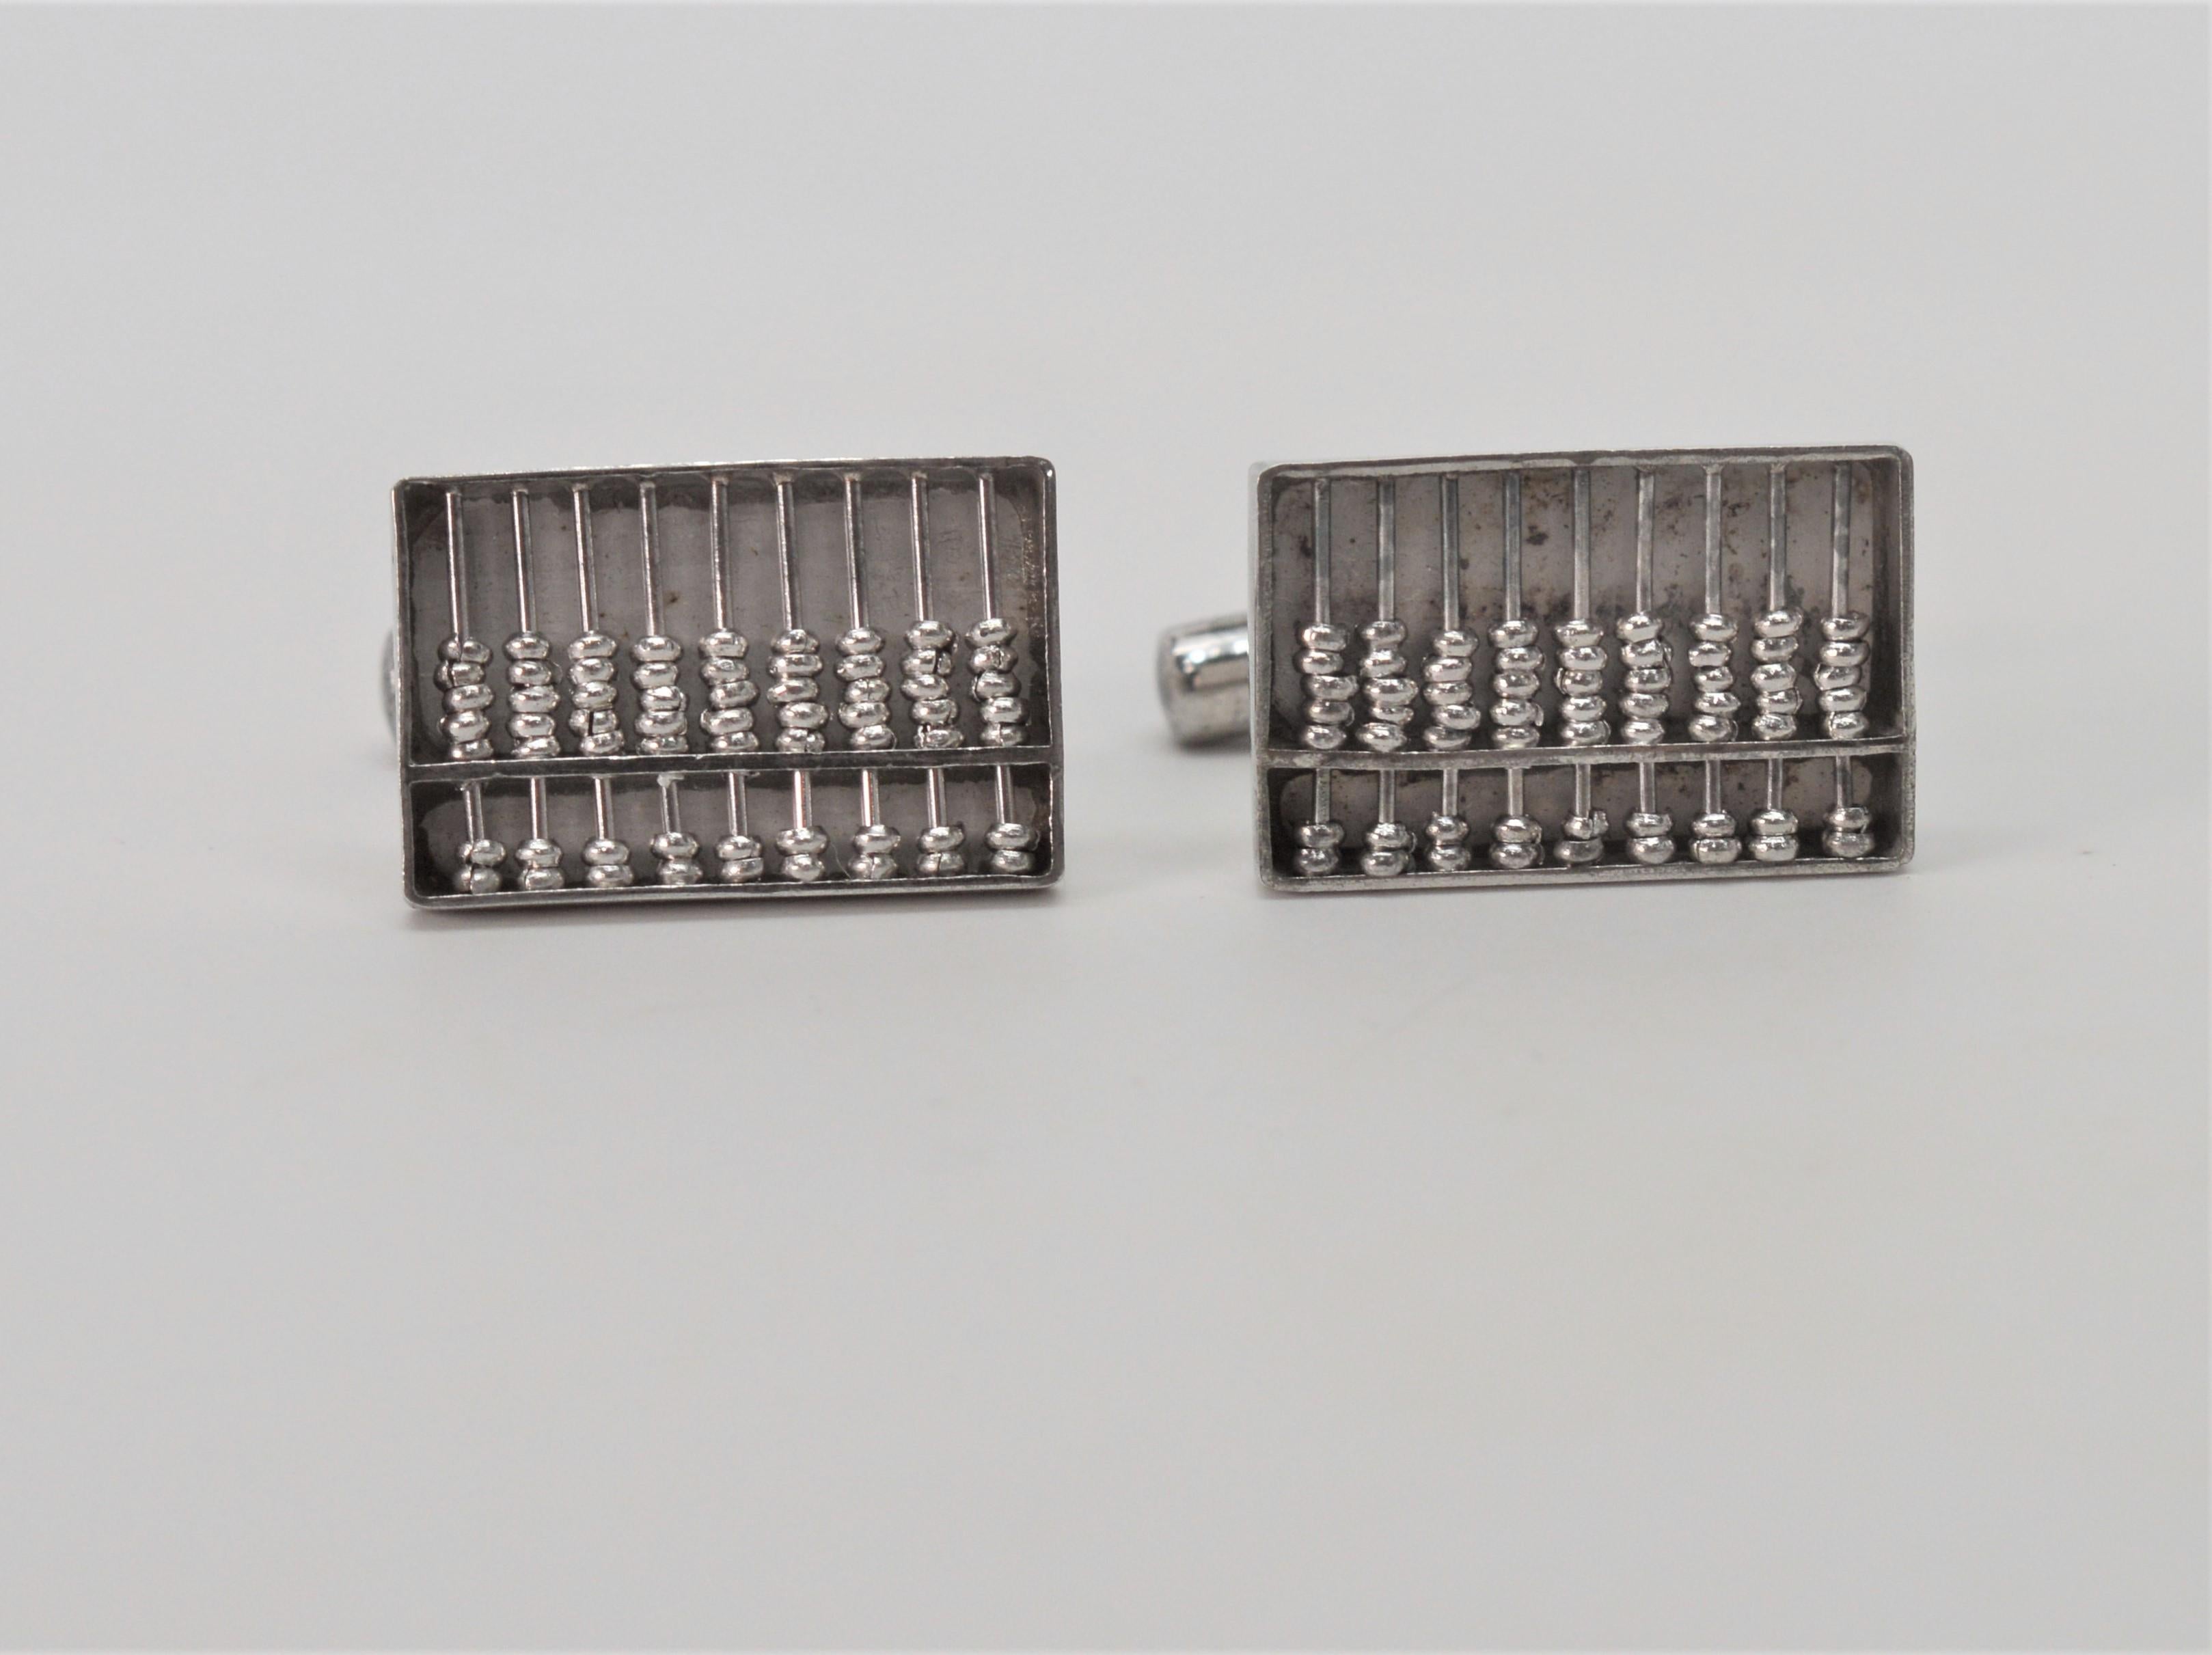  Abacus Cuff Links that function!  This eclectic pair of unisex cuff links measure 20 x 13mm and are made of .800 silver, marked Hong Kong. 
A fun and whimsical gift for the mathematician in your life. Date of manufacture is unknown. From the Estate